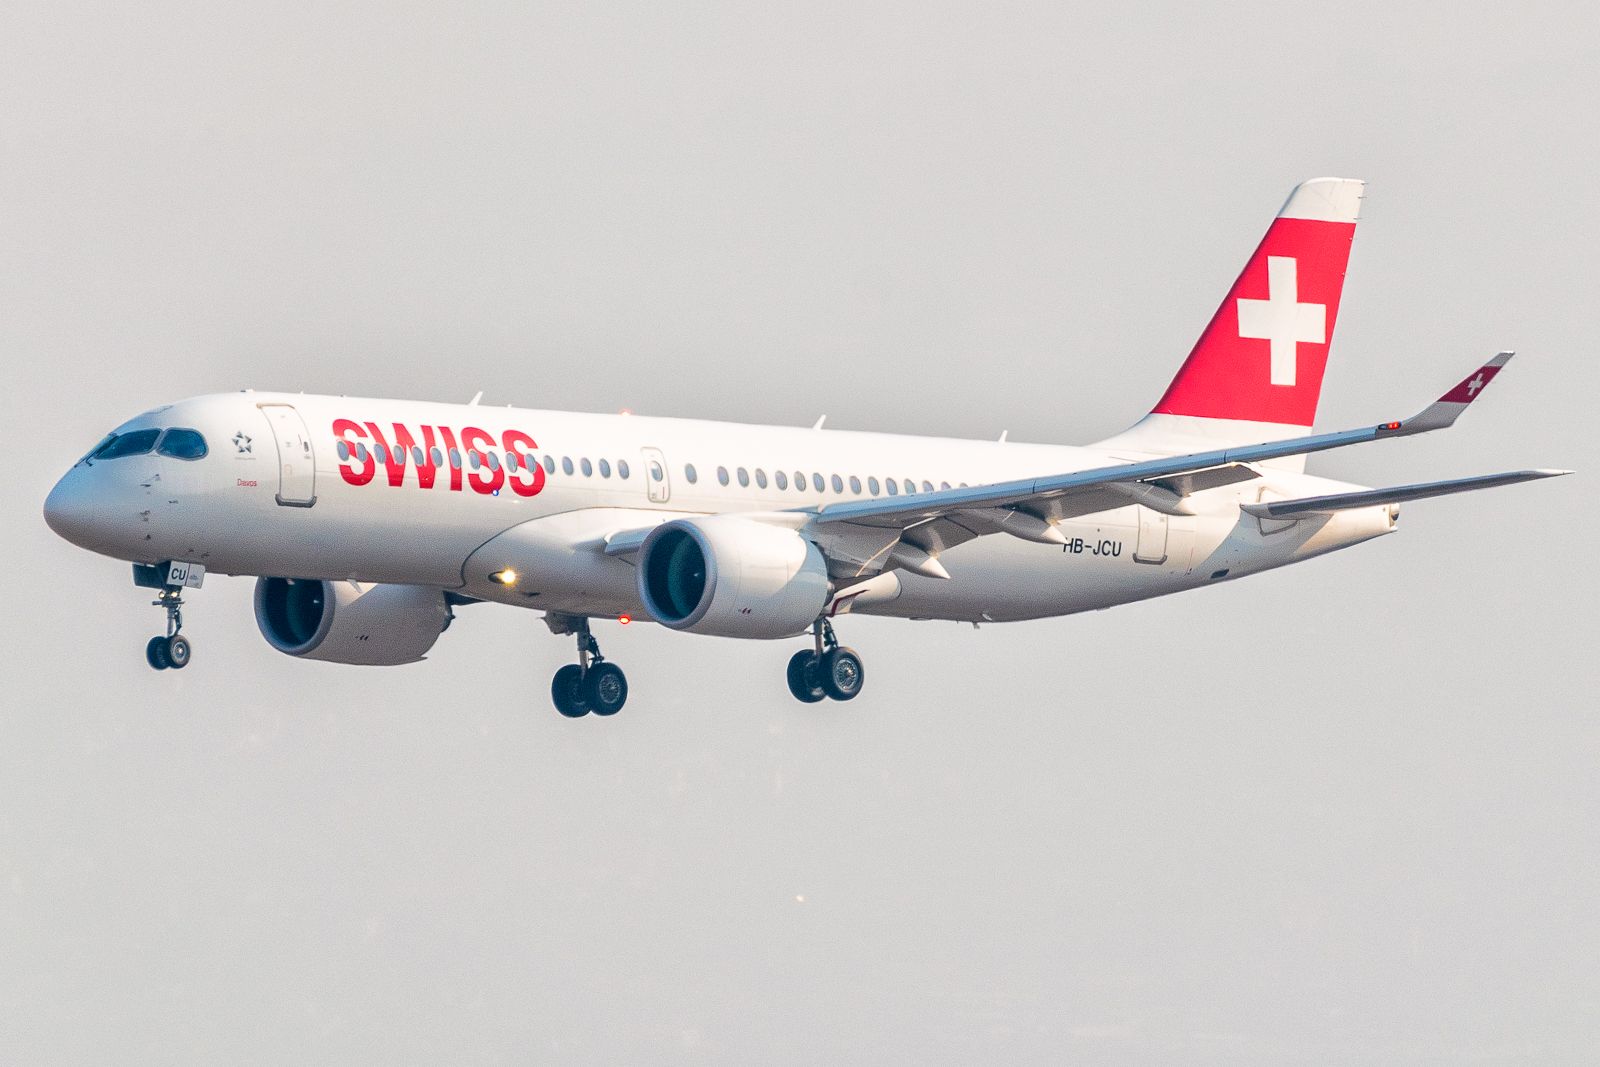 A SWISS Airbus A220 flying in the sky.